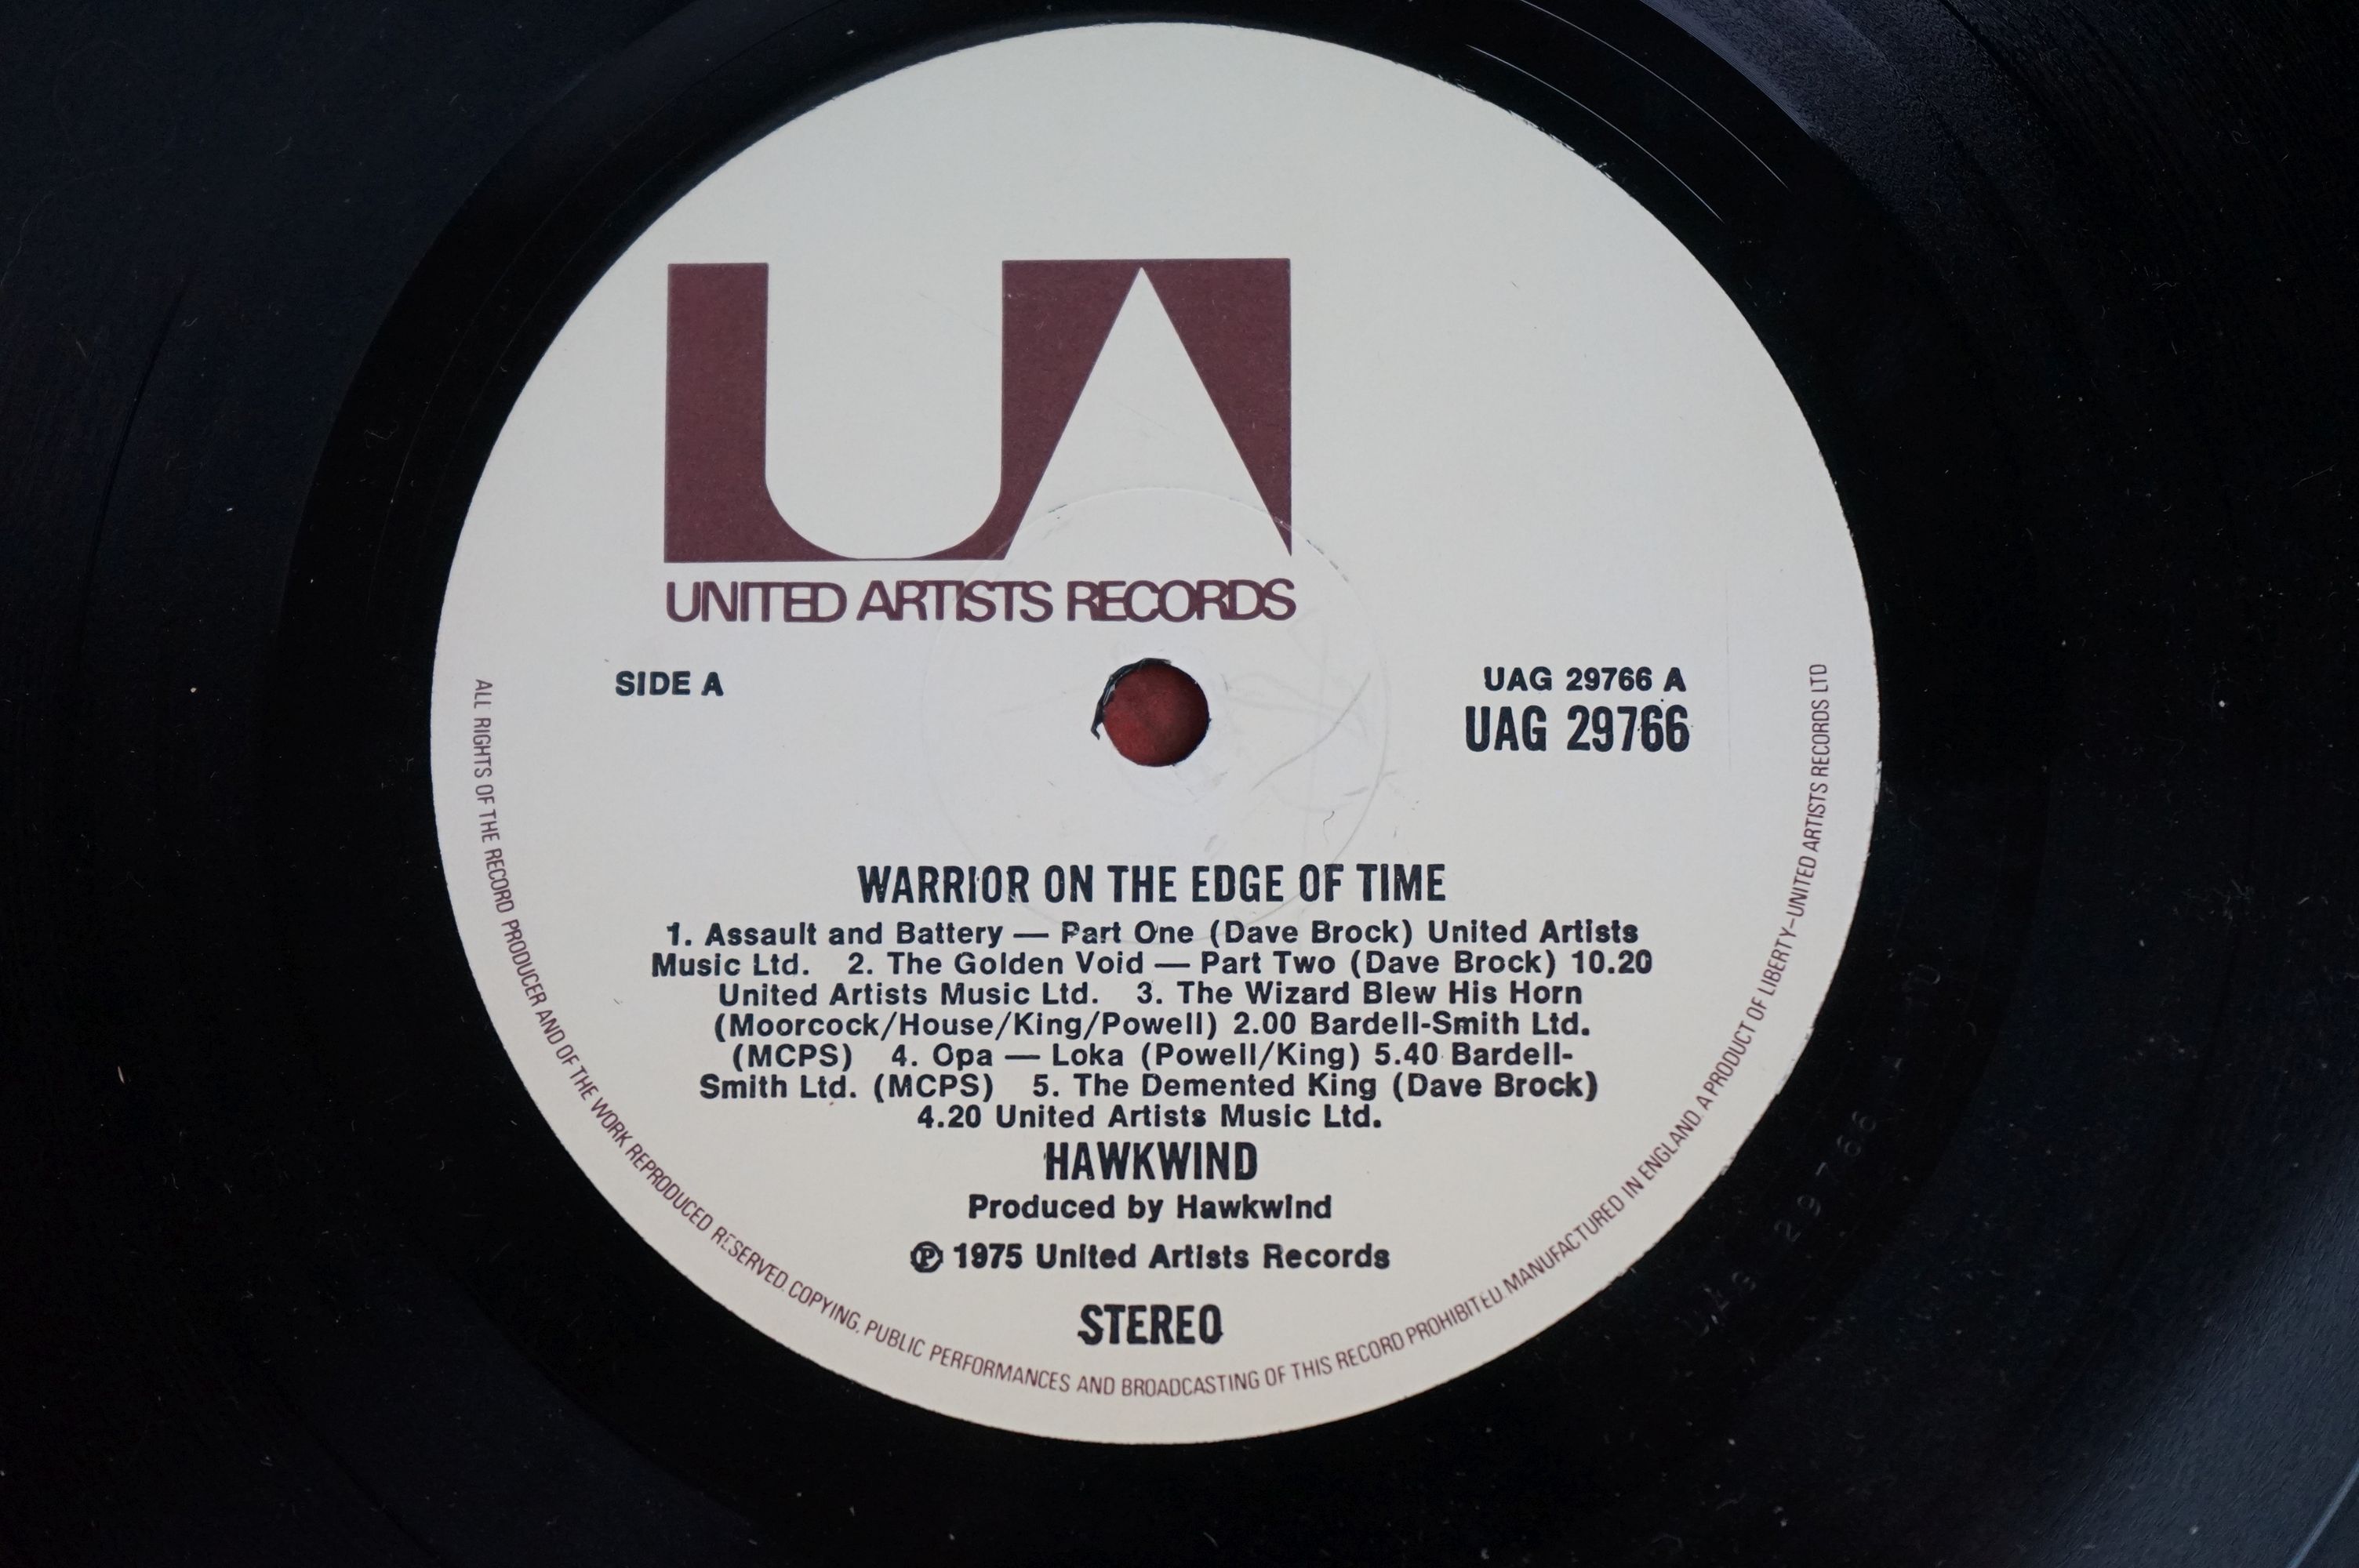 Vinyl - Hawkwind Warrior On The Edge Of Time (UAG 29766) complete with inner, gatefold intact. - Image 8 of 8